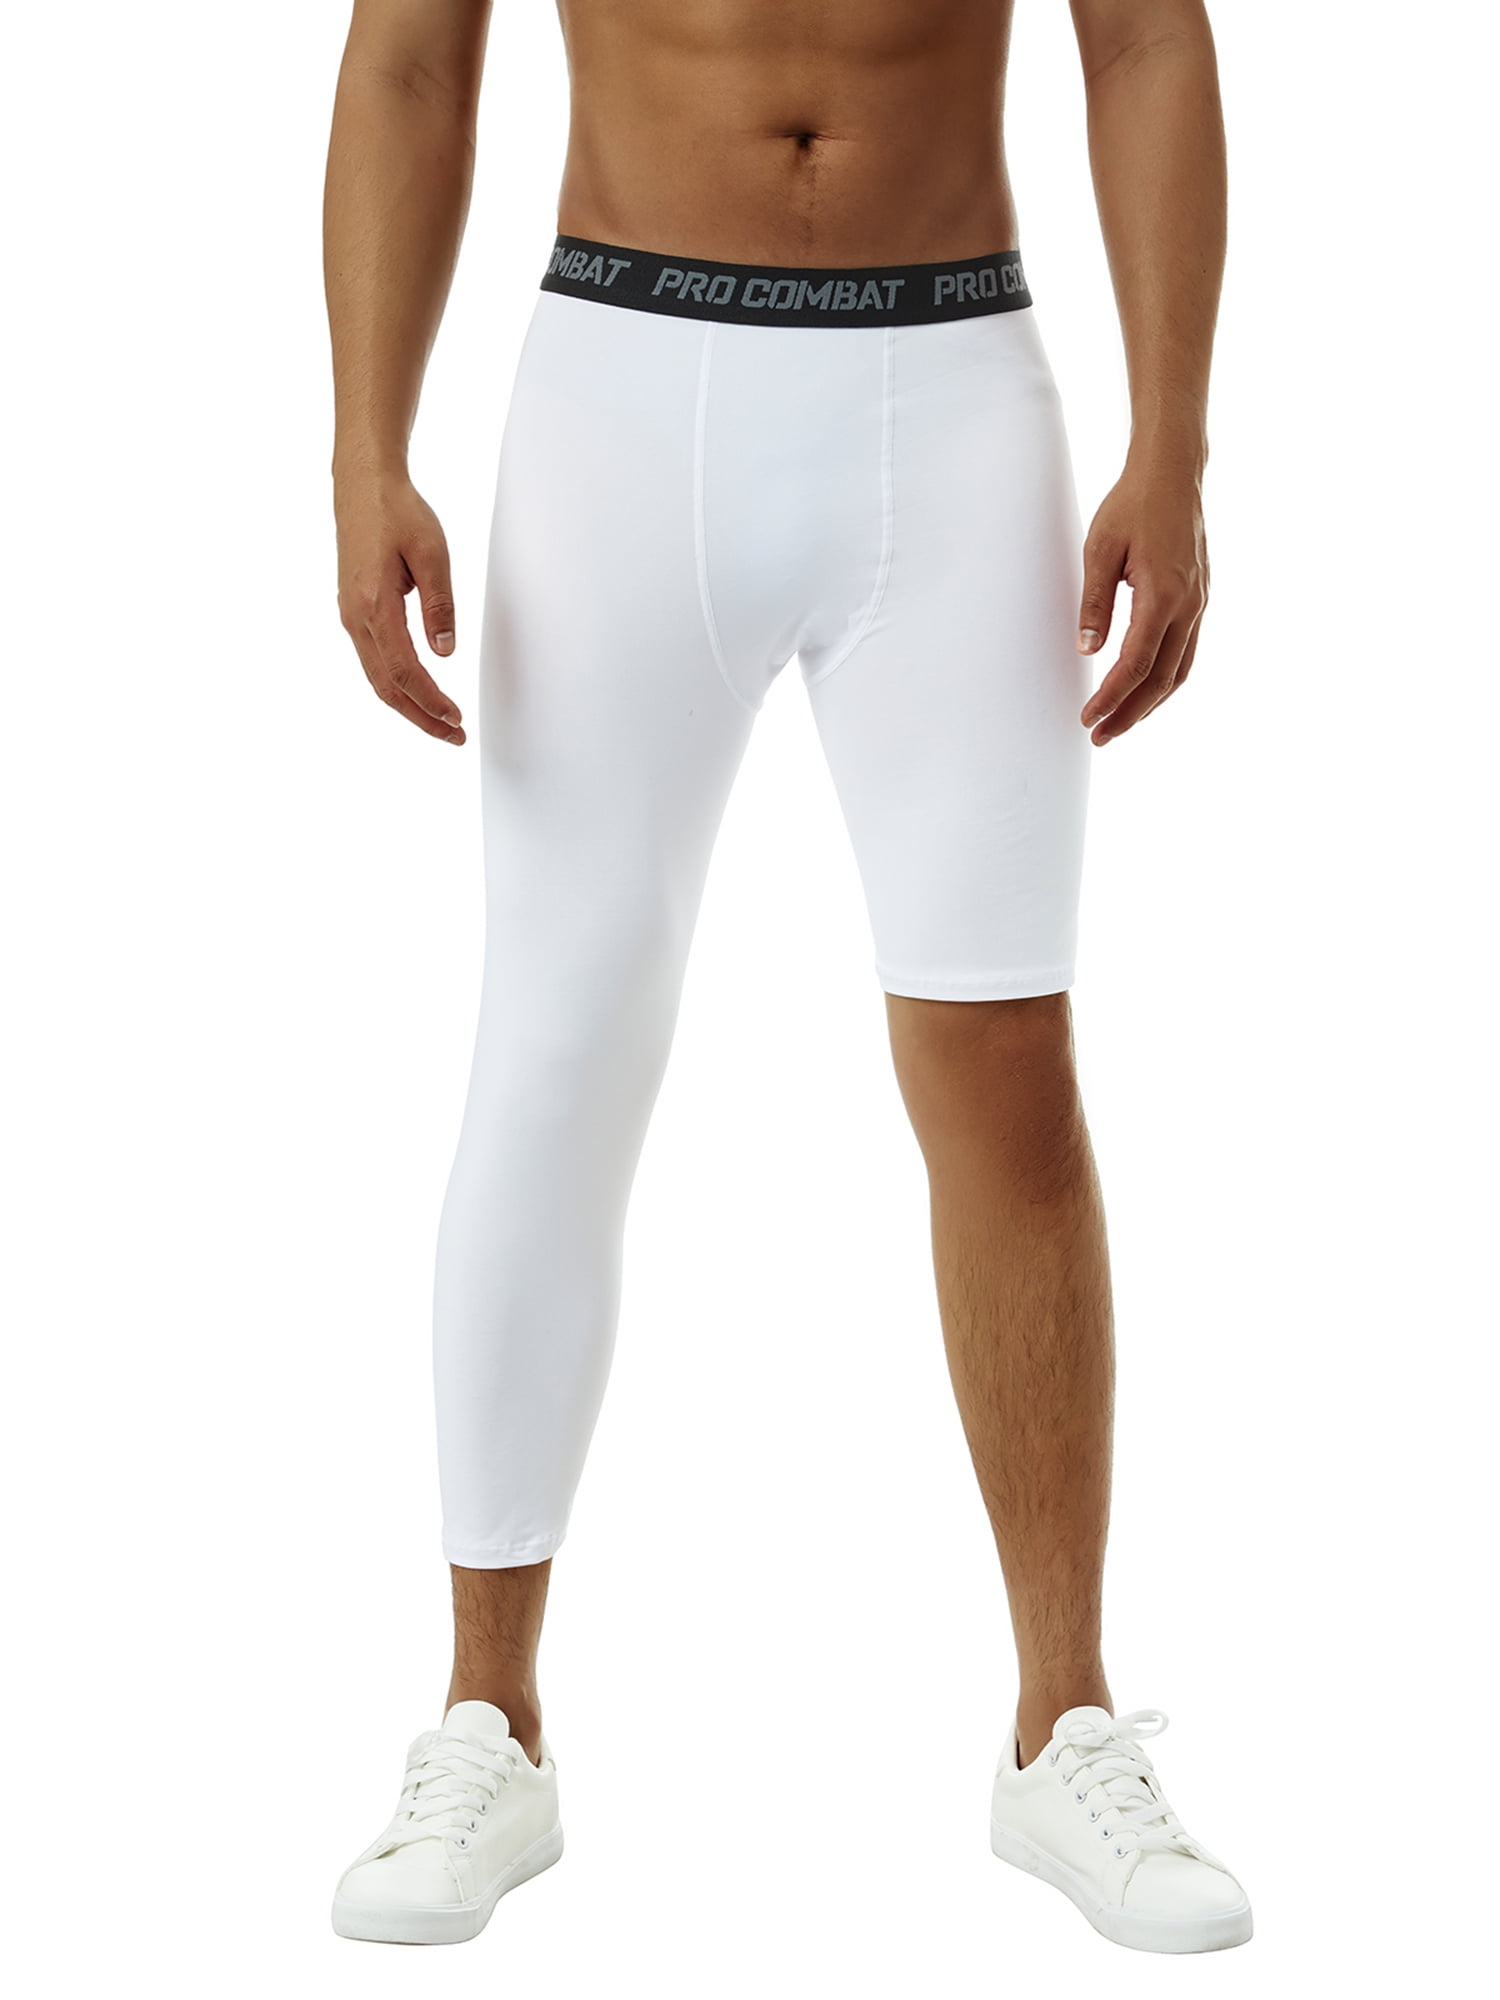  One Leg Men's Compression Tights for Basketball